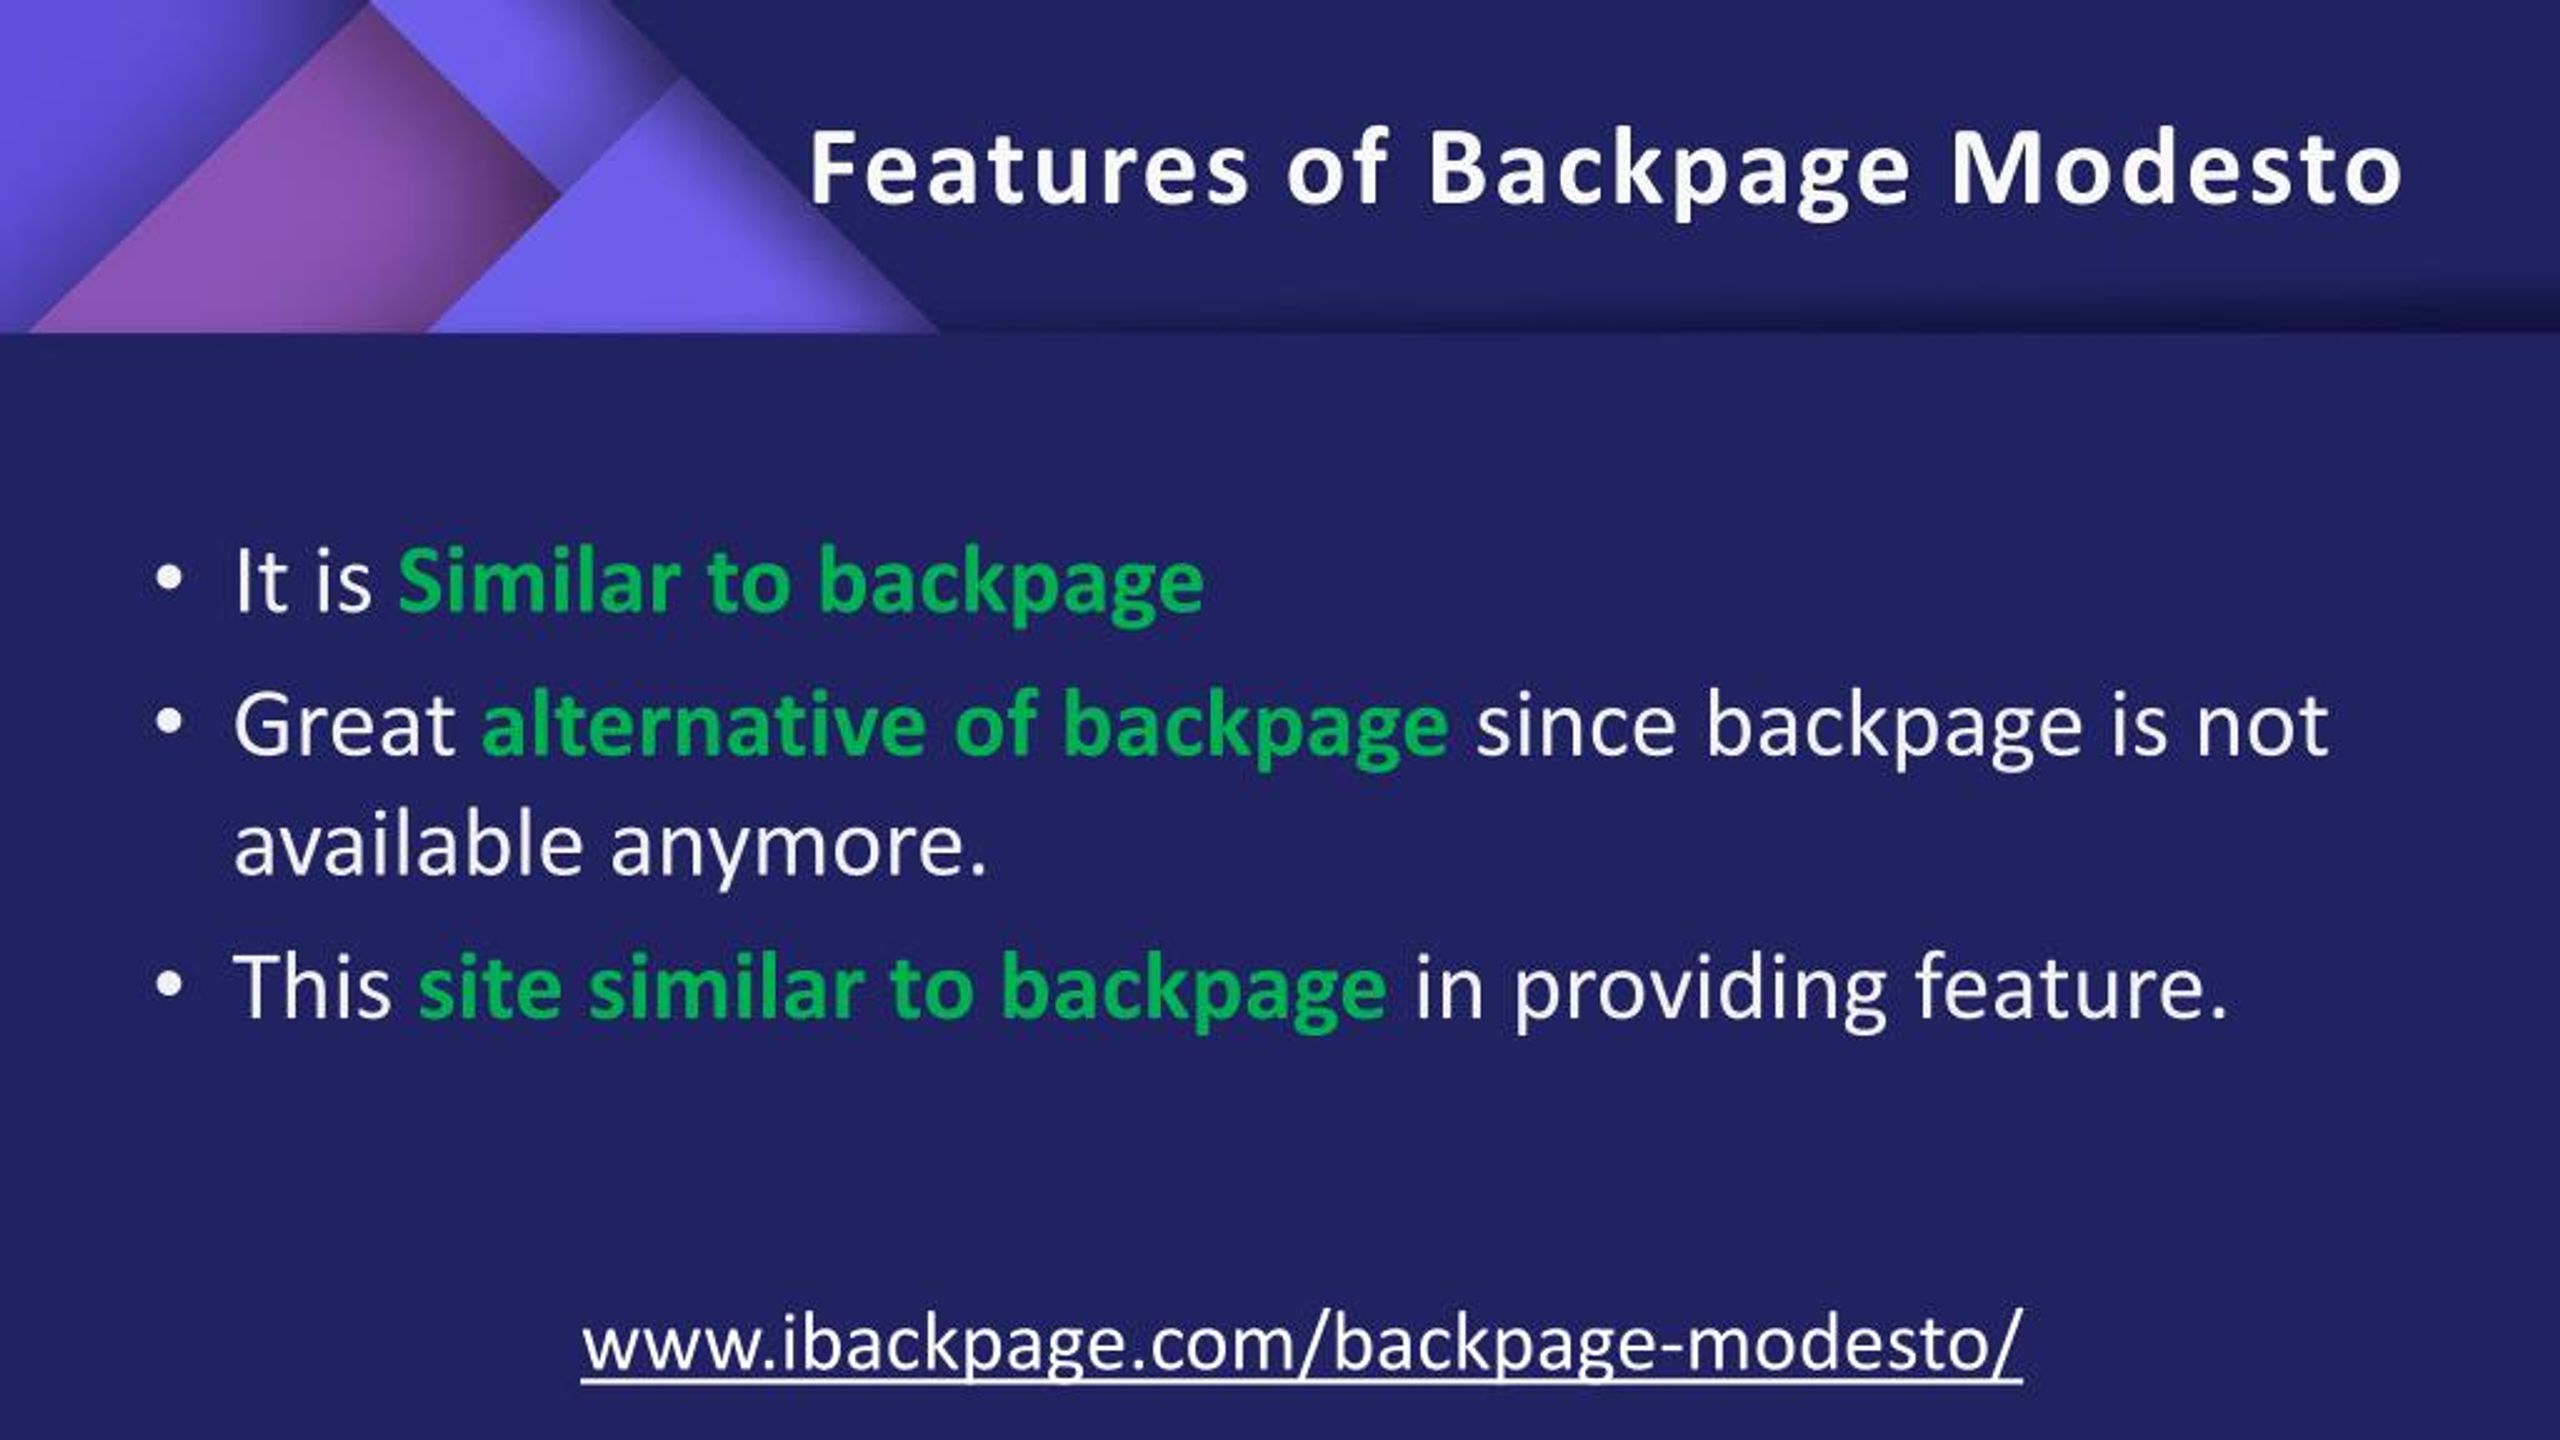 * This site similar to backpage in providing feature. * www.ibackpage.com/b...